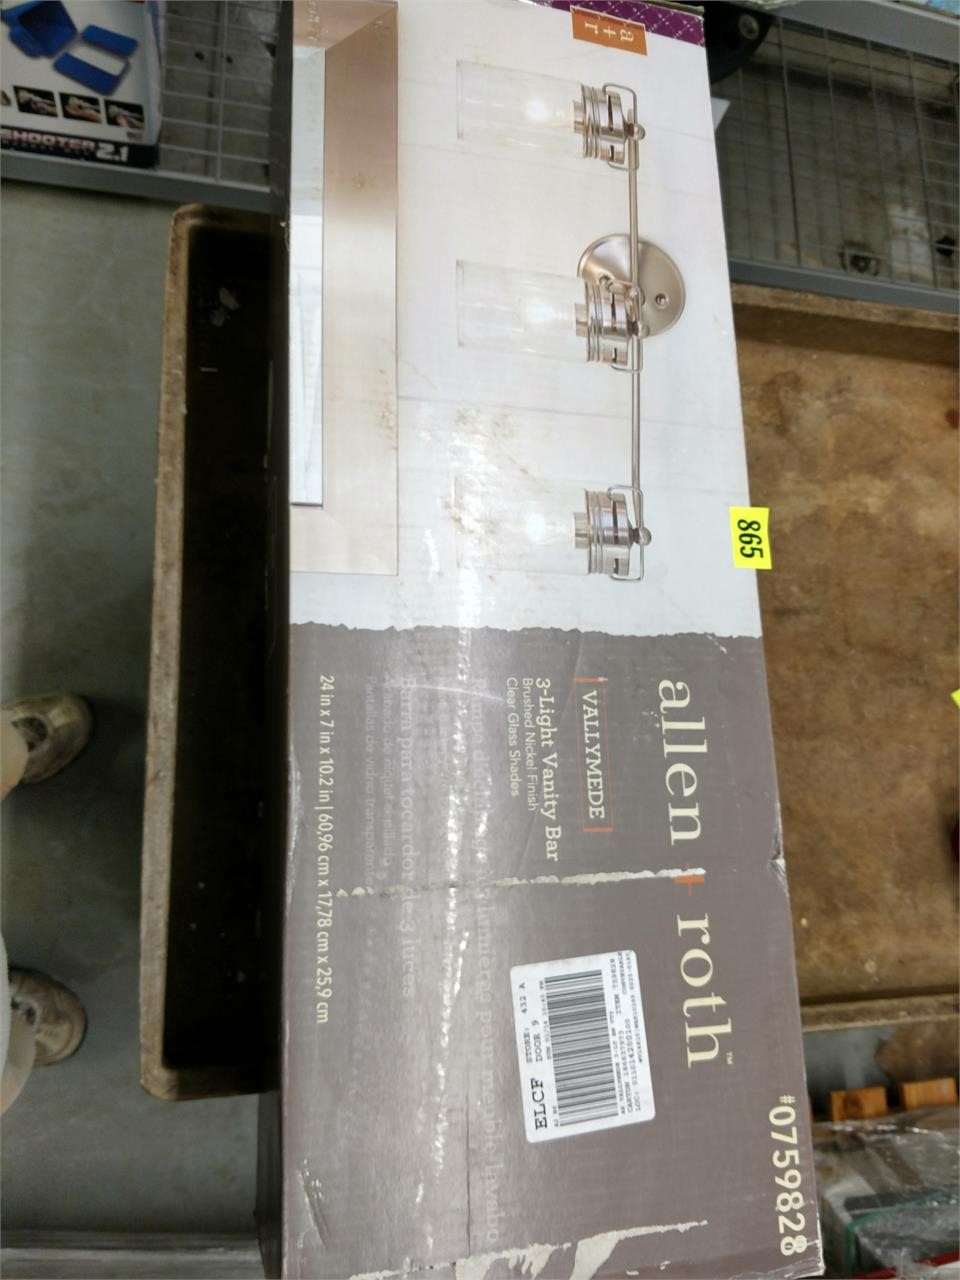 Returns, discontinued and new lowes, home depot items